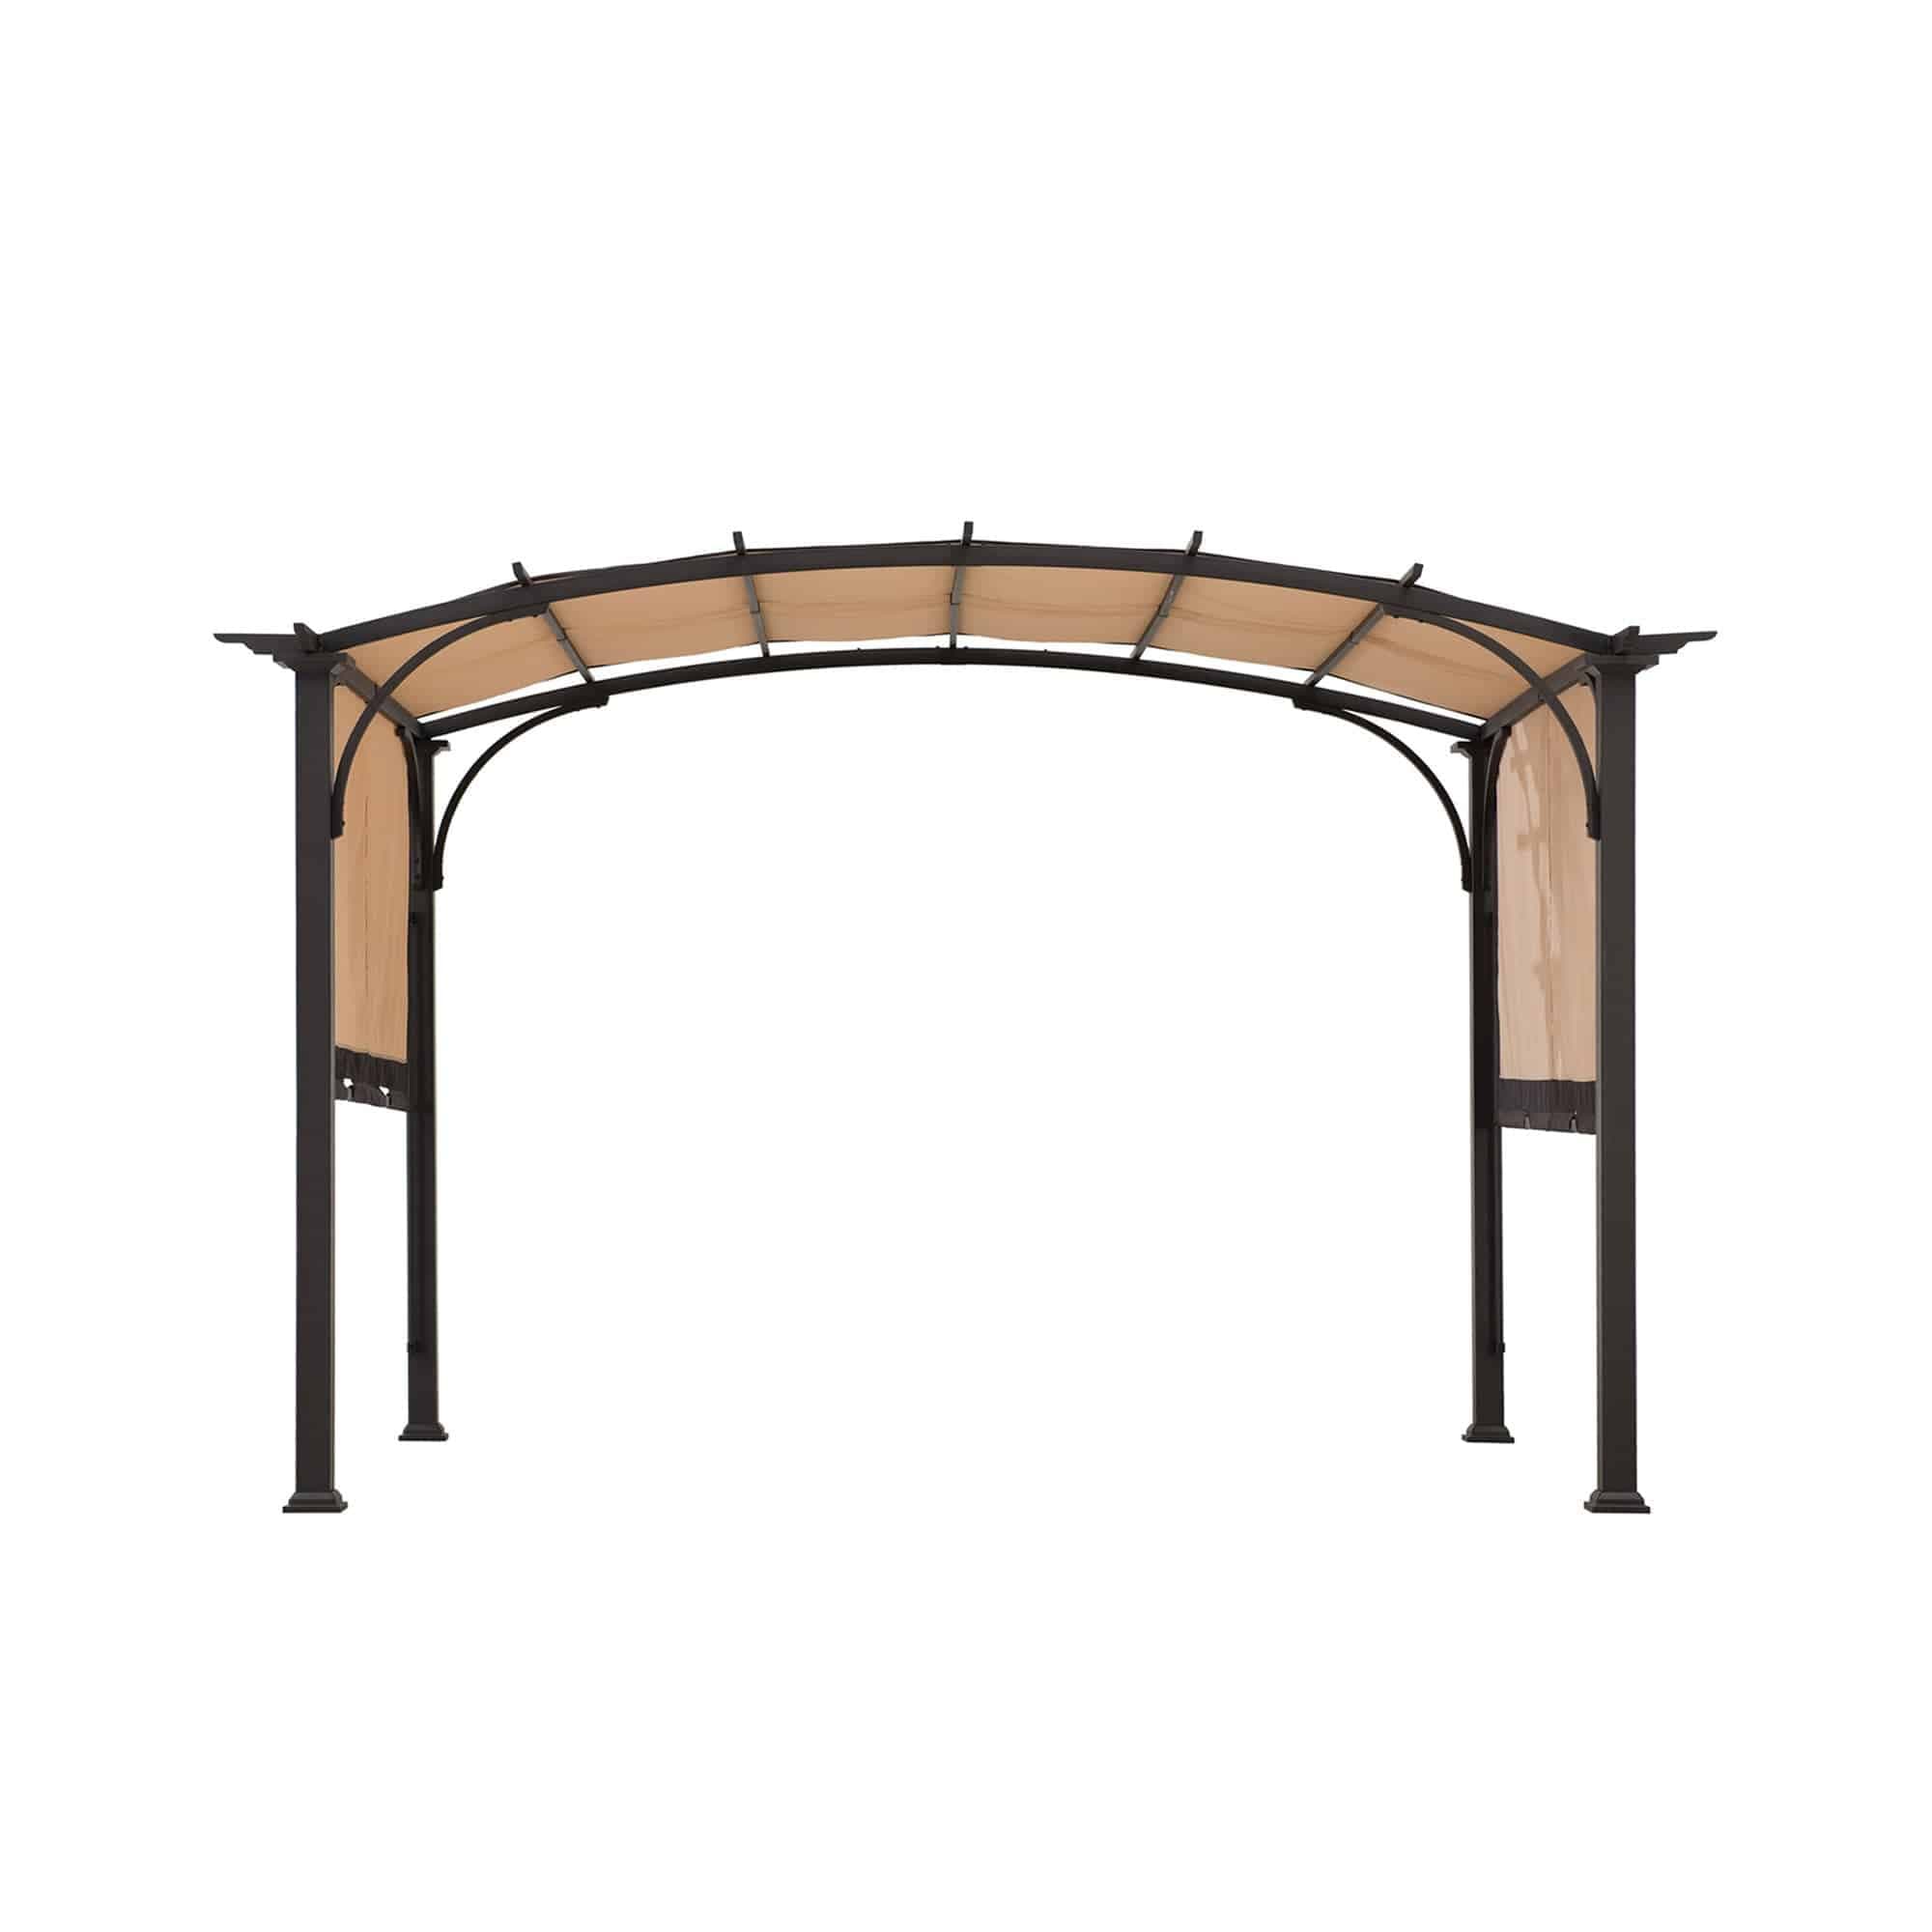 Sunjoy 11 ft. x 9.5 ft. Tan Steel Arched Pergola with Adjustable Canopy